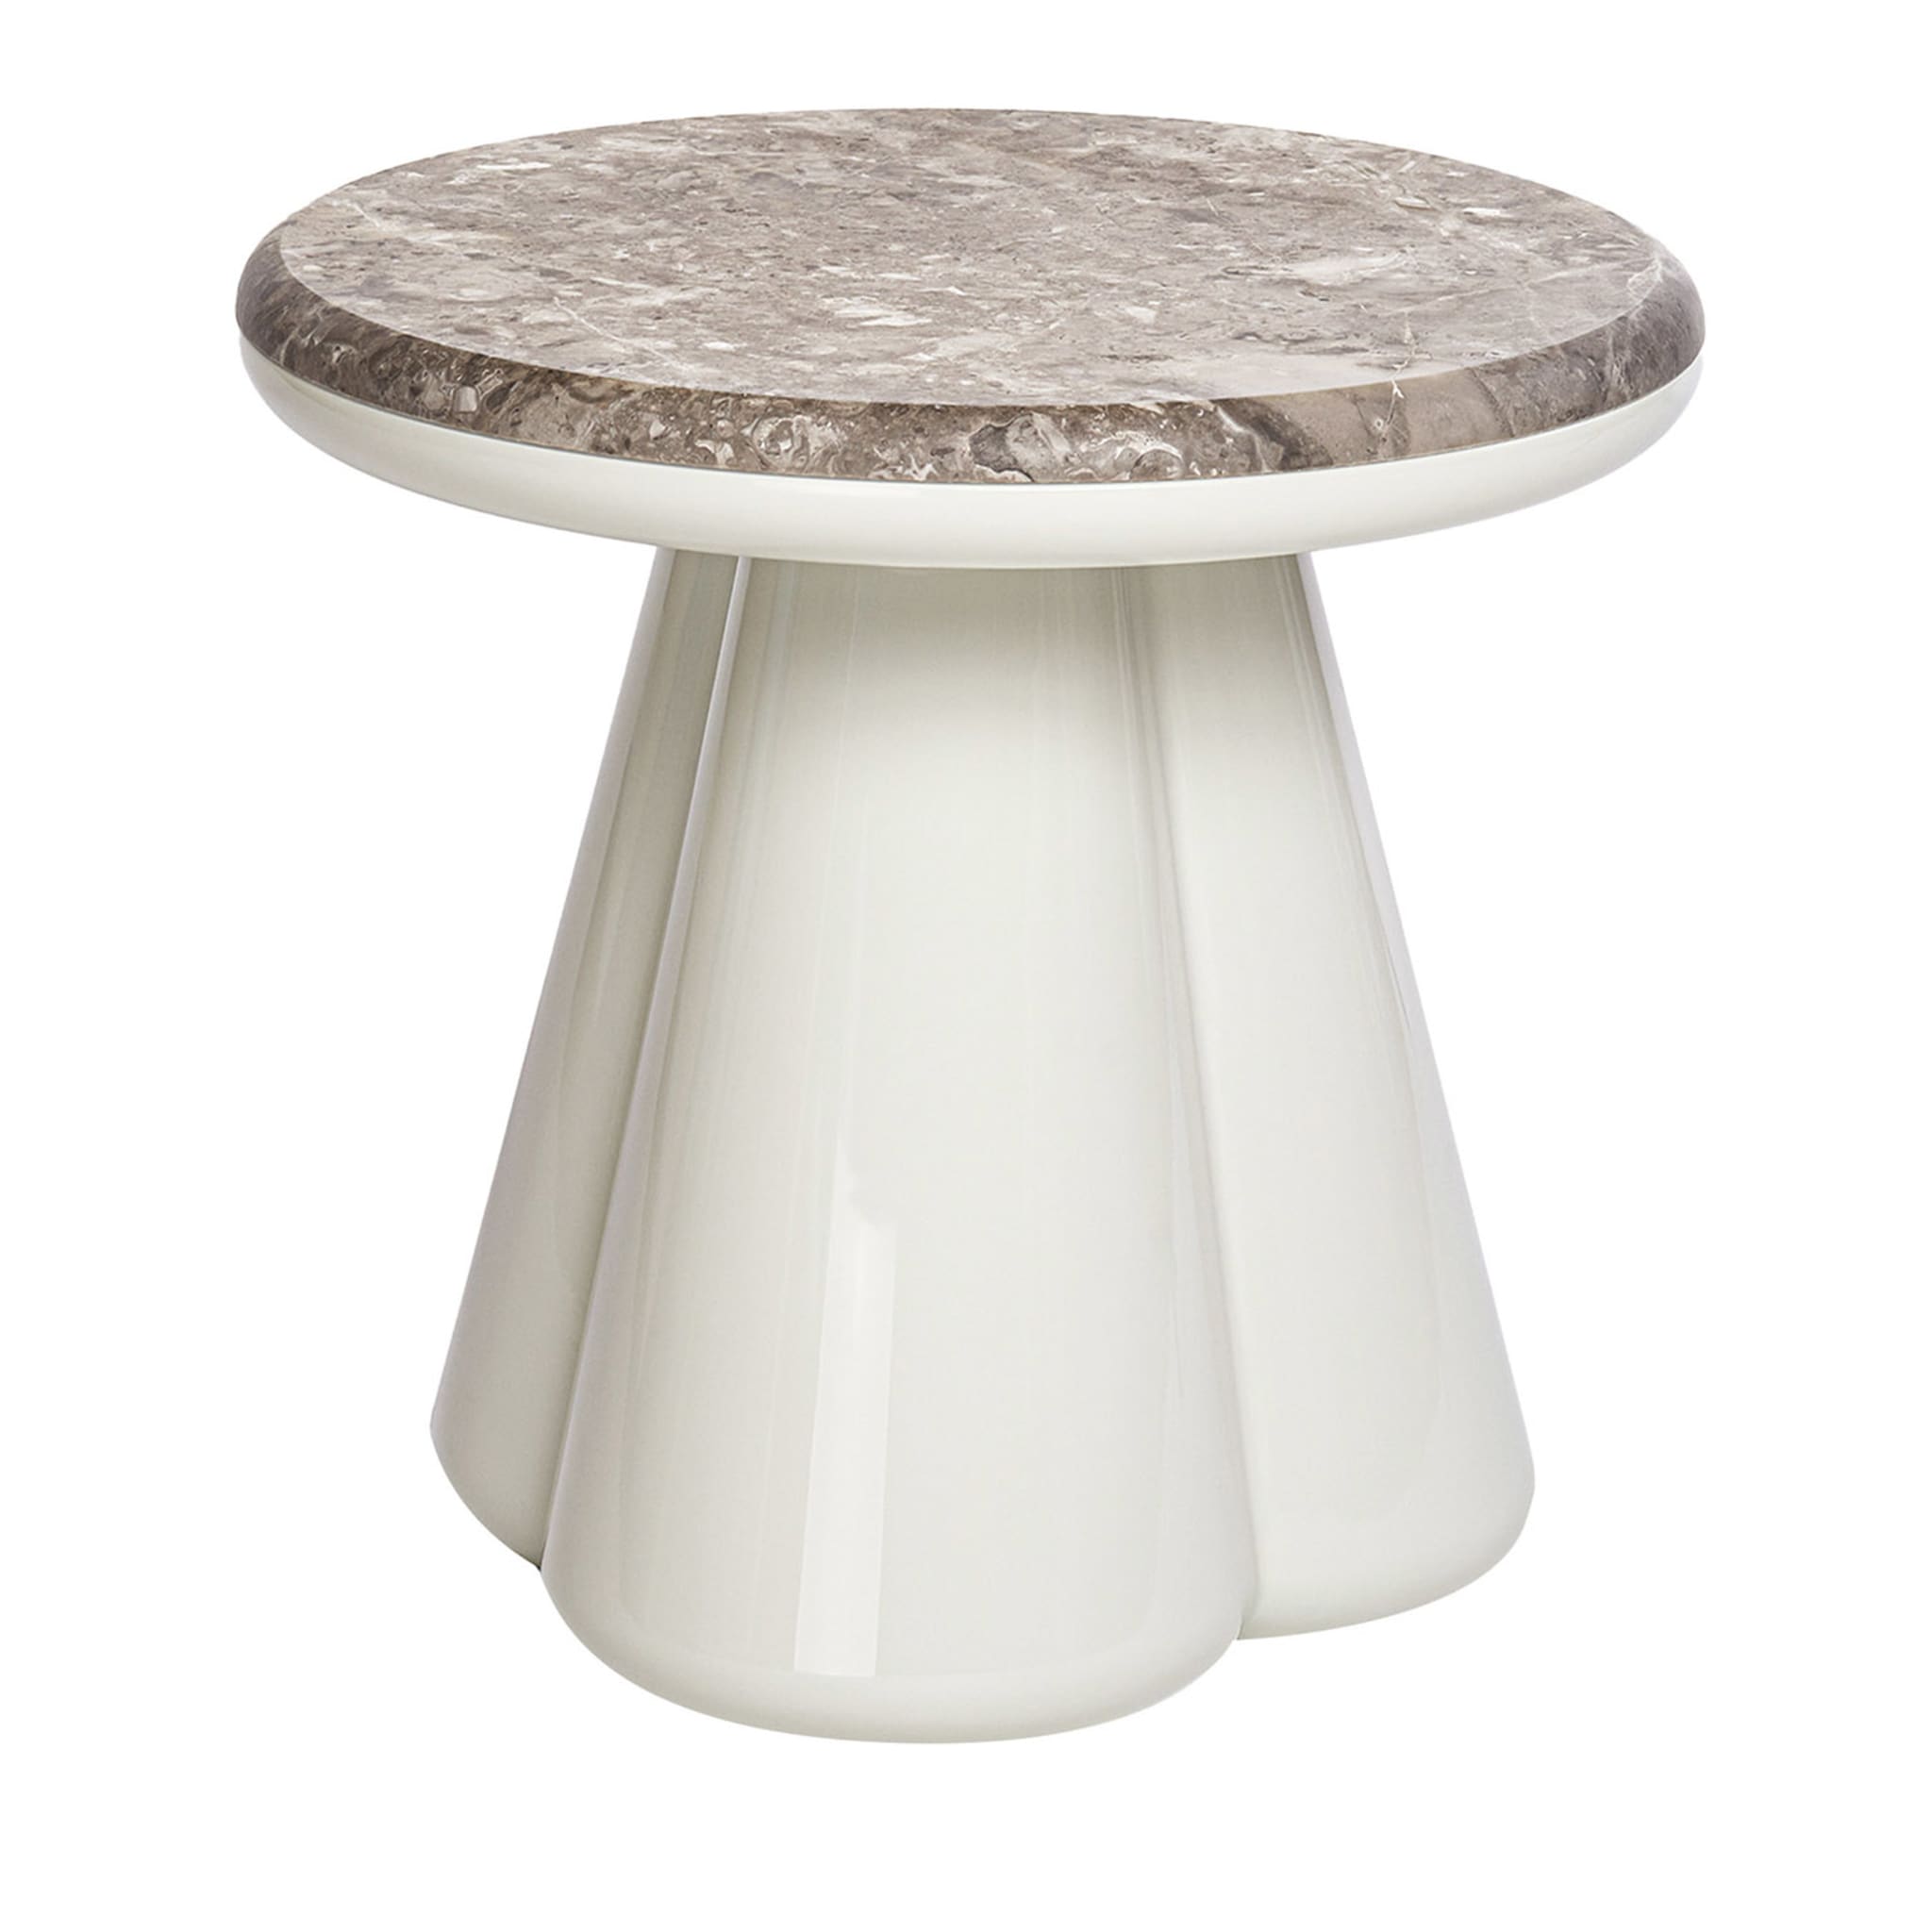 Table d'appoint blanche Anodo #1 - Vue principale